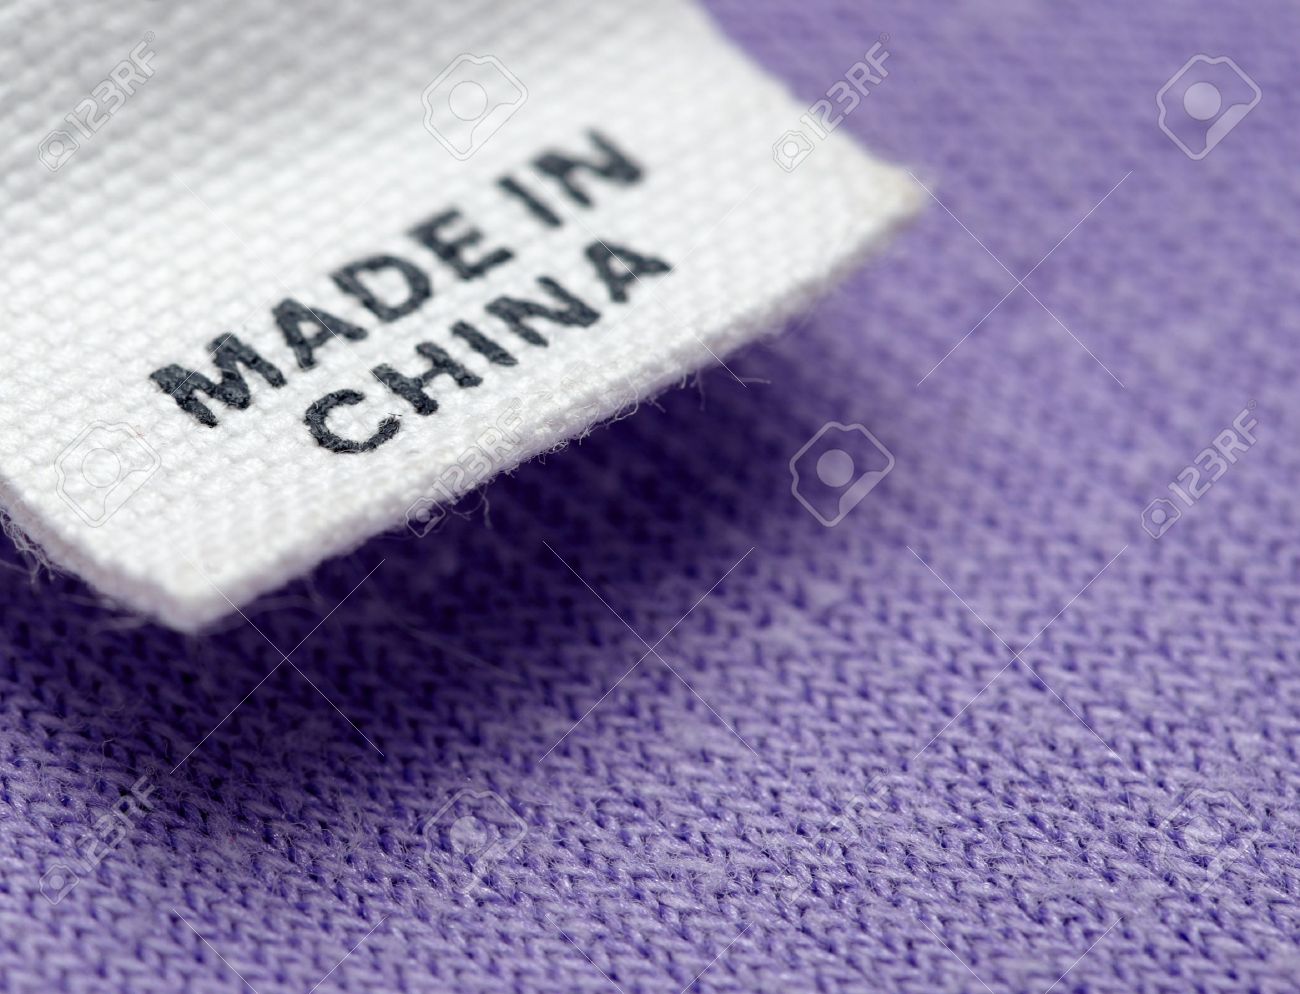 Made in China Label Blank Meme Template